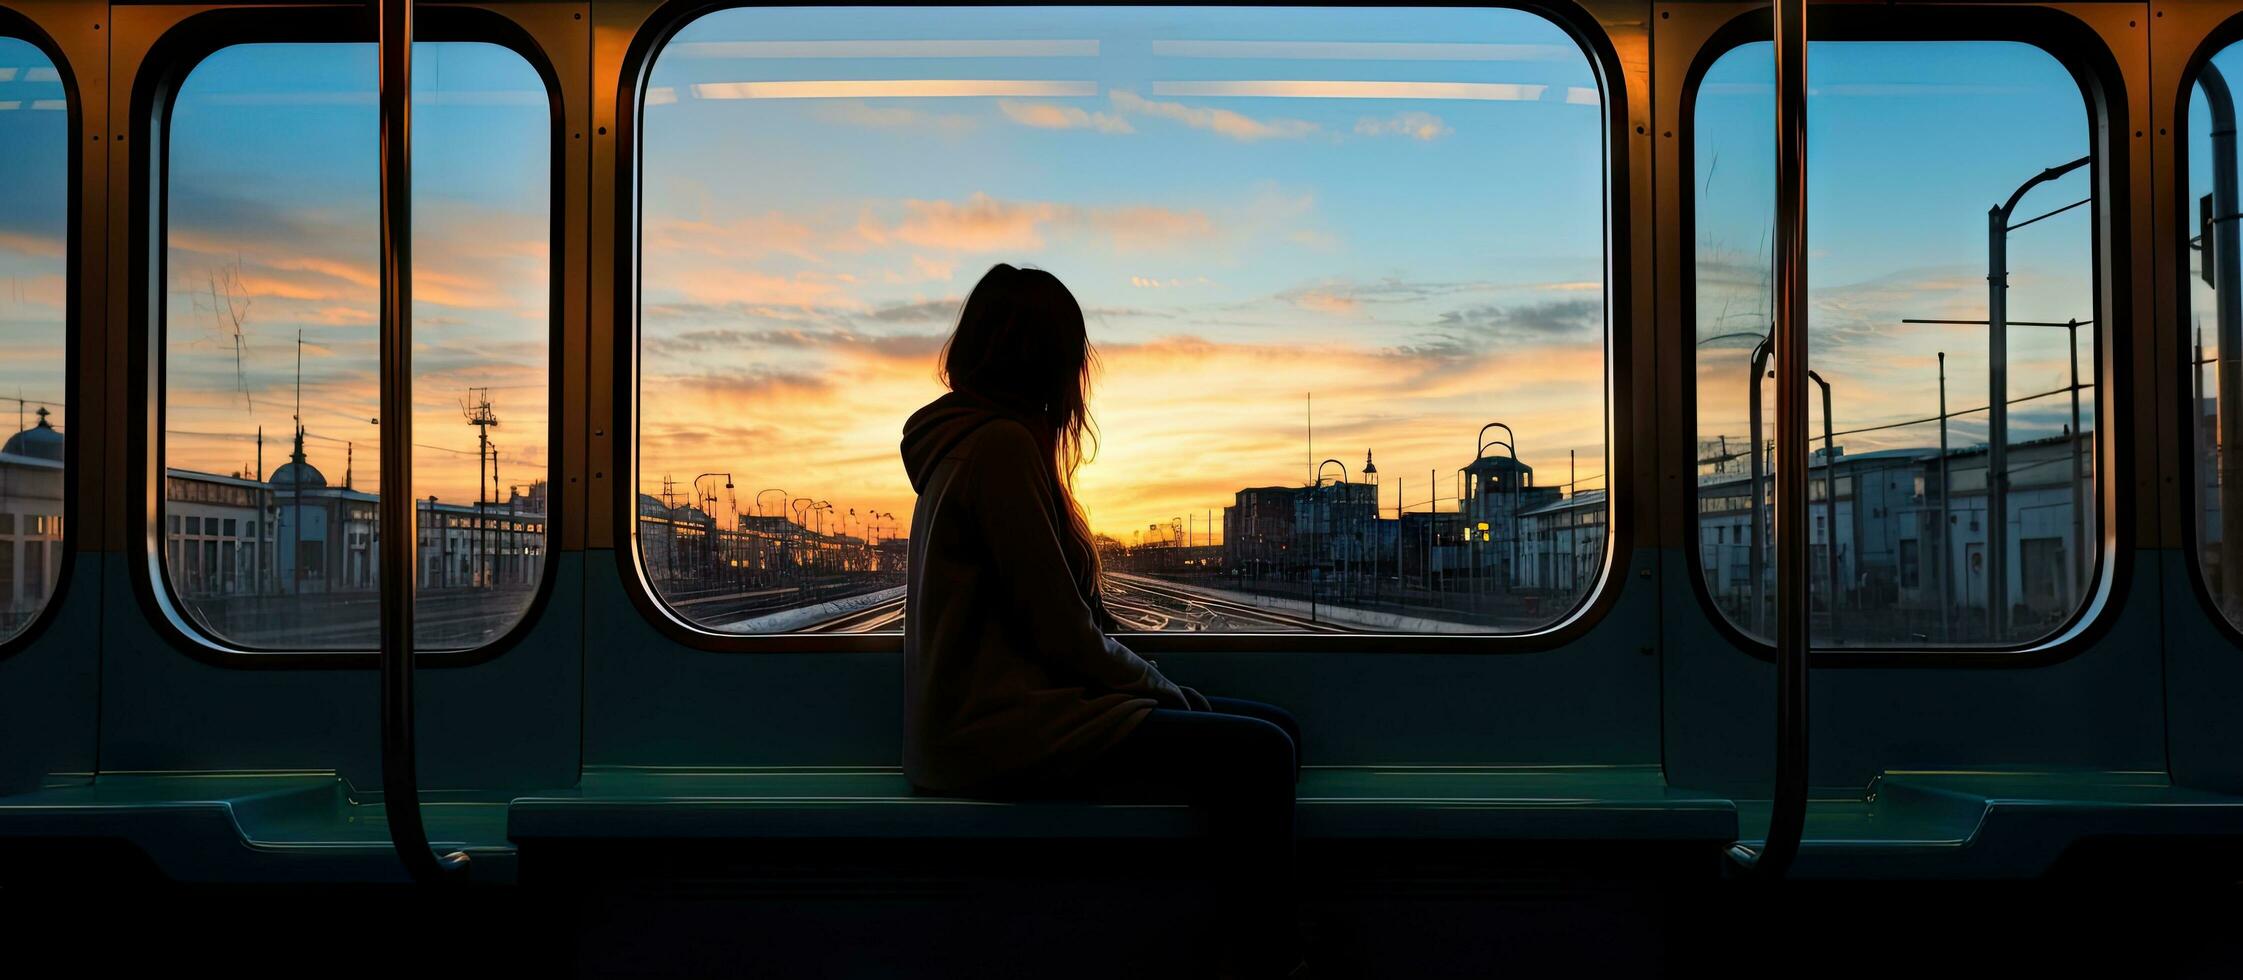 Silhouette of a woman sitting on a train framed by Windows photo